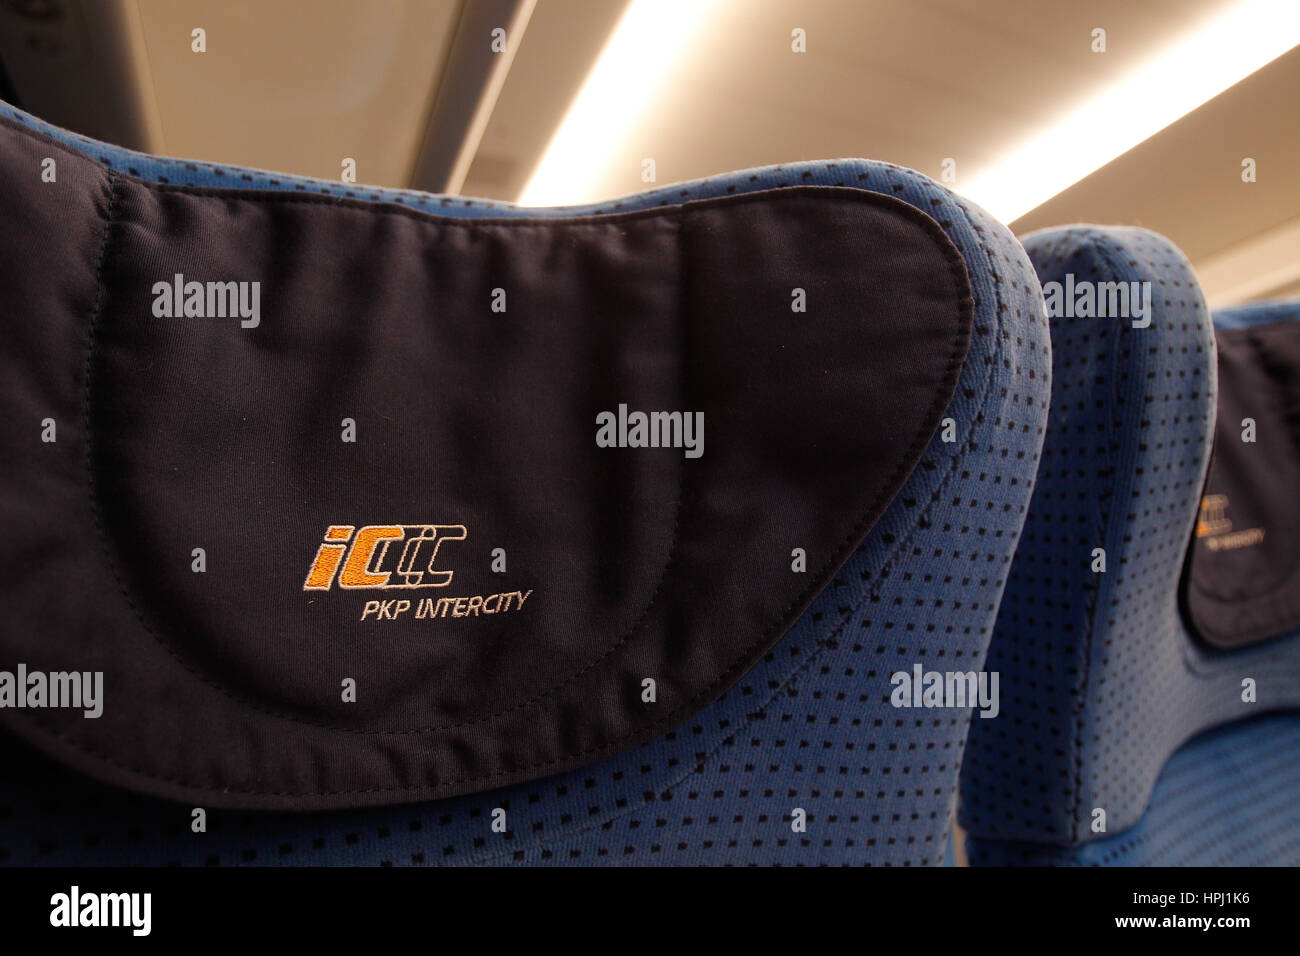 Seats inside the new intercity train travelling between Warsaw and Bydgoszcz are een on 21 January, 2107. Stock Photo